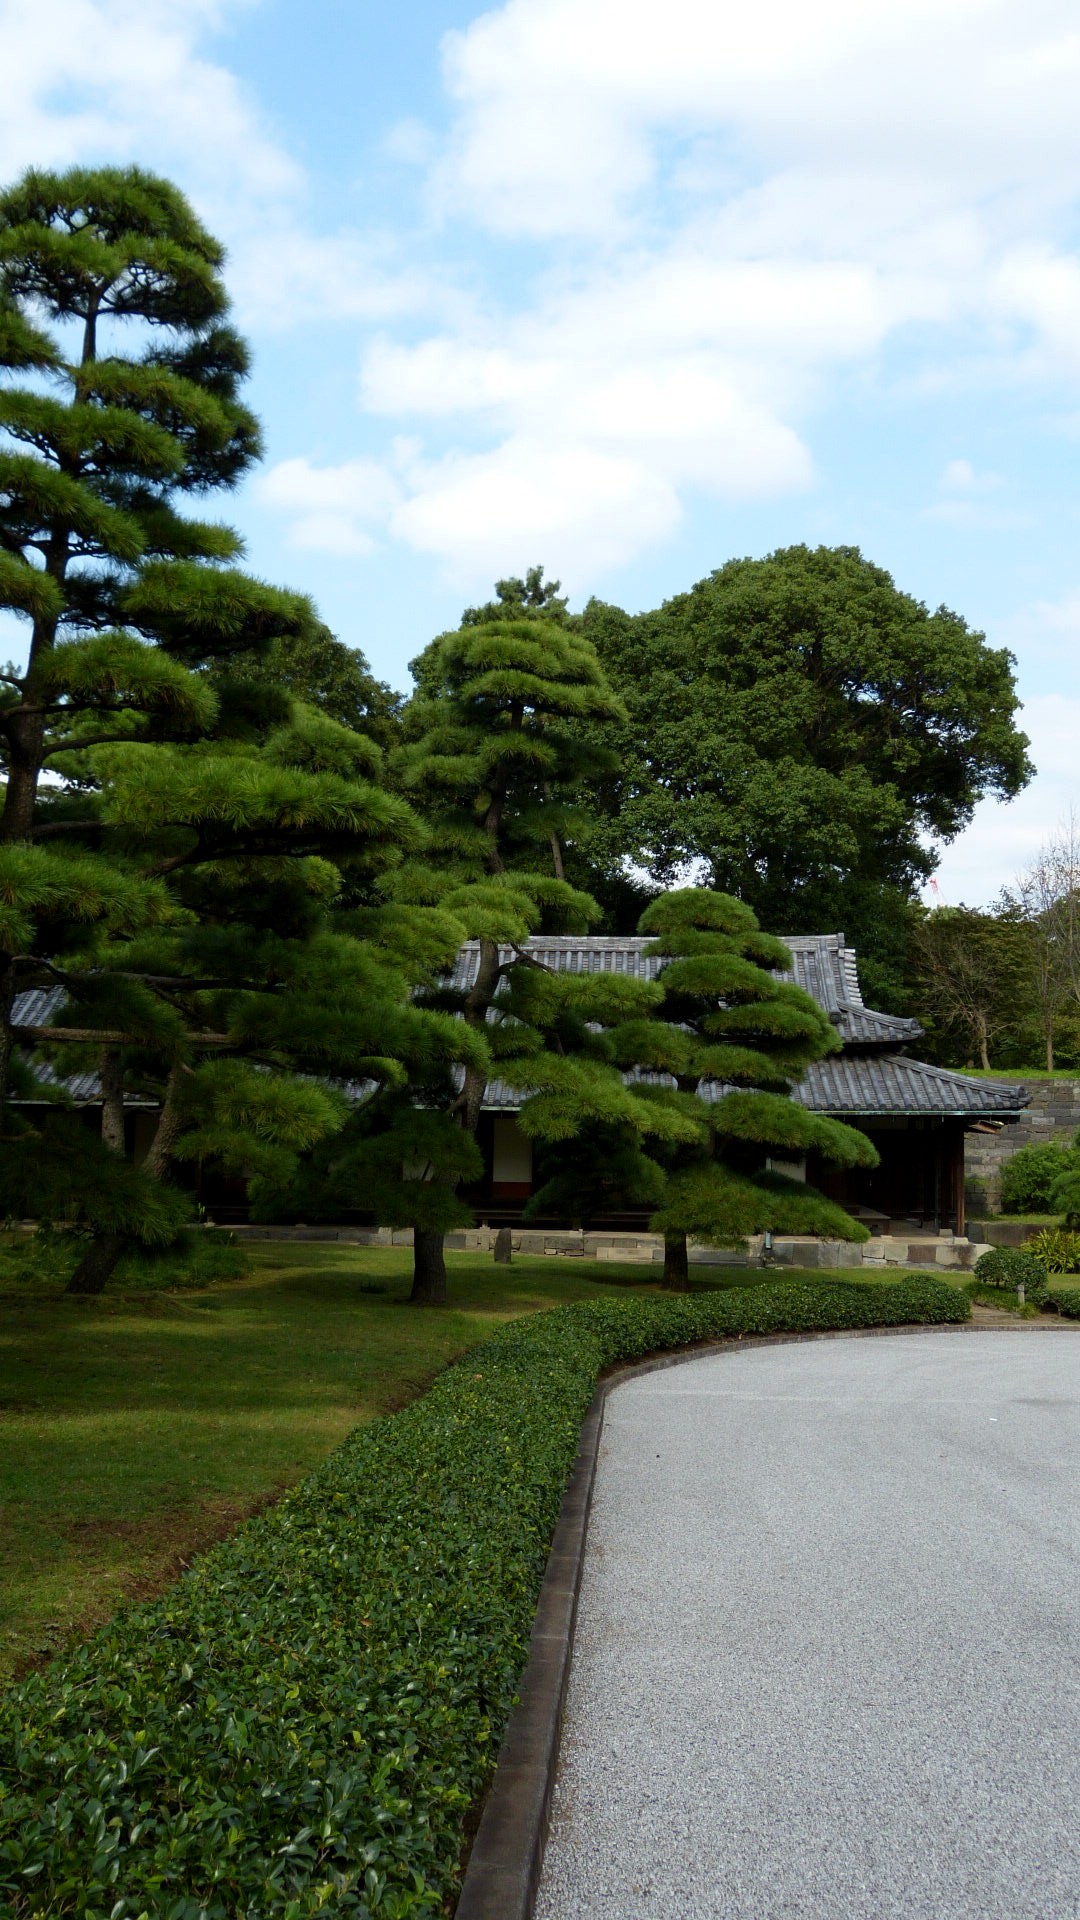 manicured trees obscure a traditional building